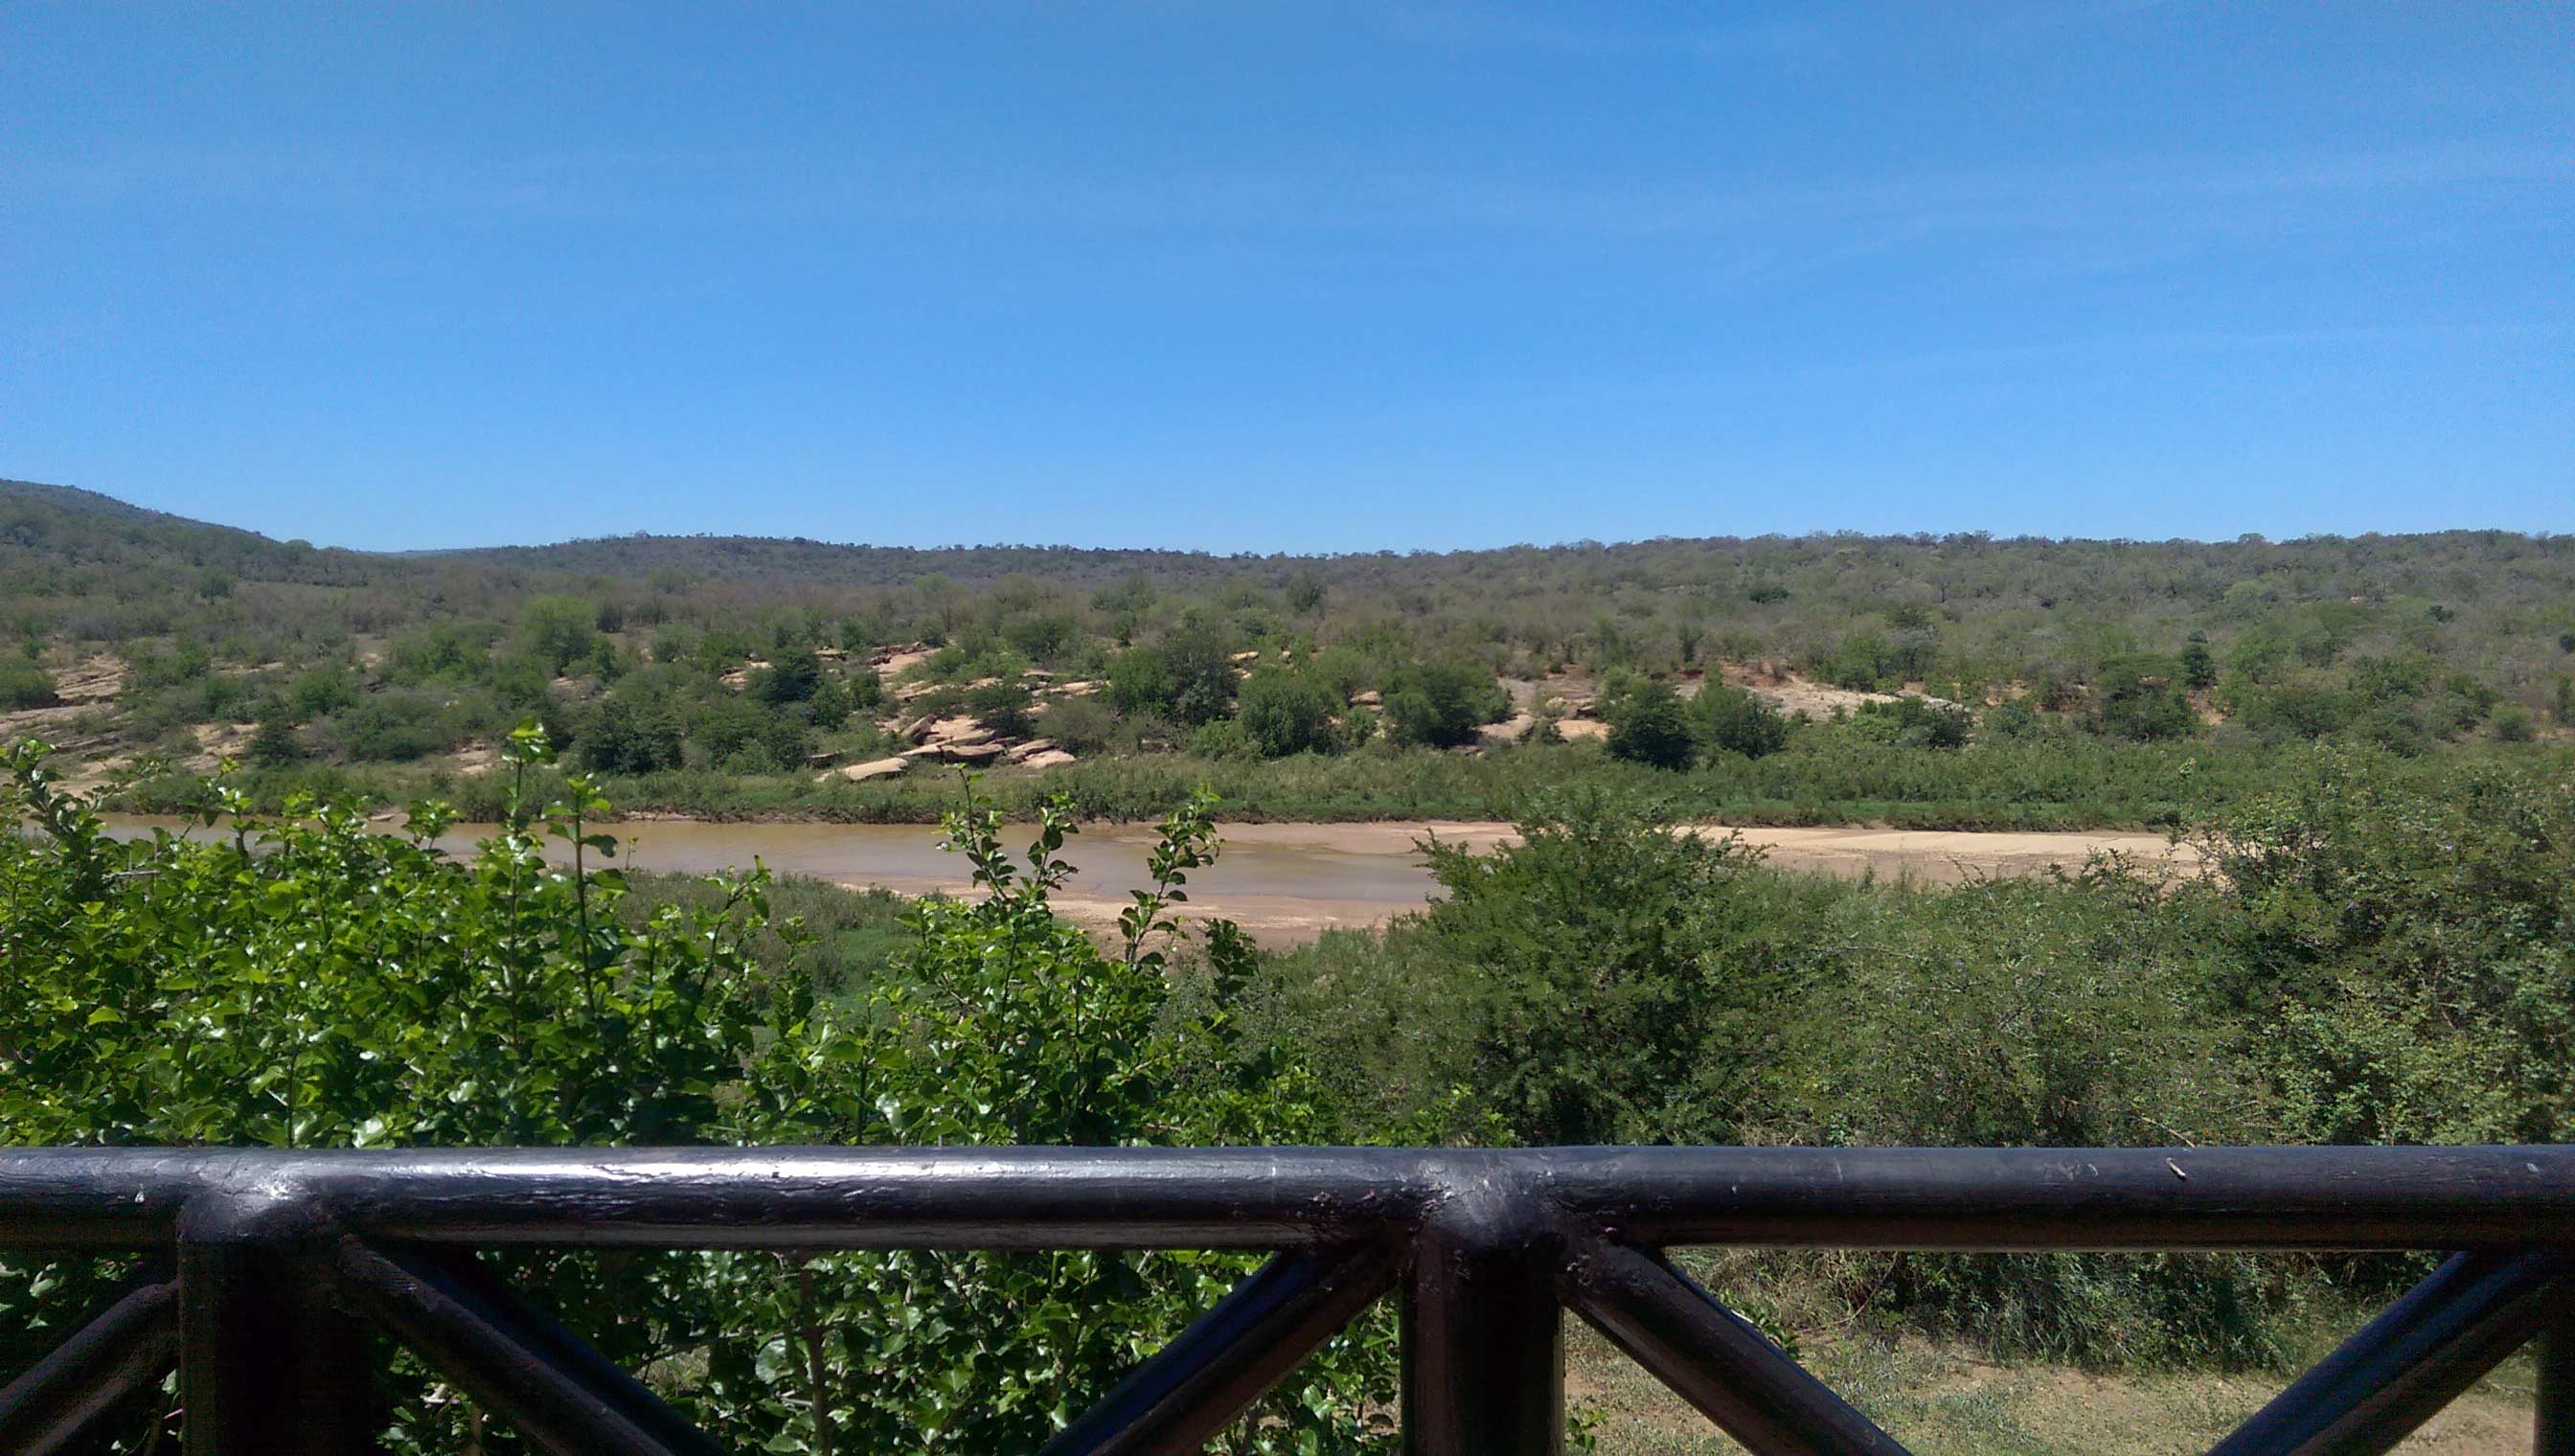 Gqoyeni-Bush-Lodge-Hluhluwe-Umfolozi-Game-Reserve-South-Africa-View-of-River-Uncropped